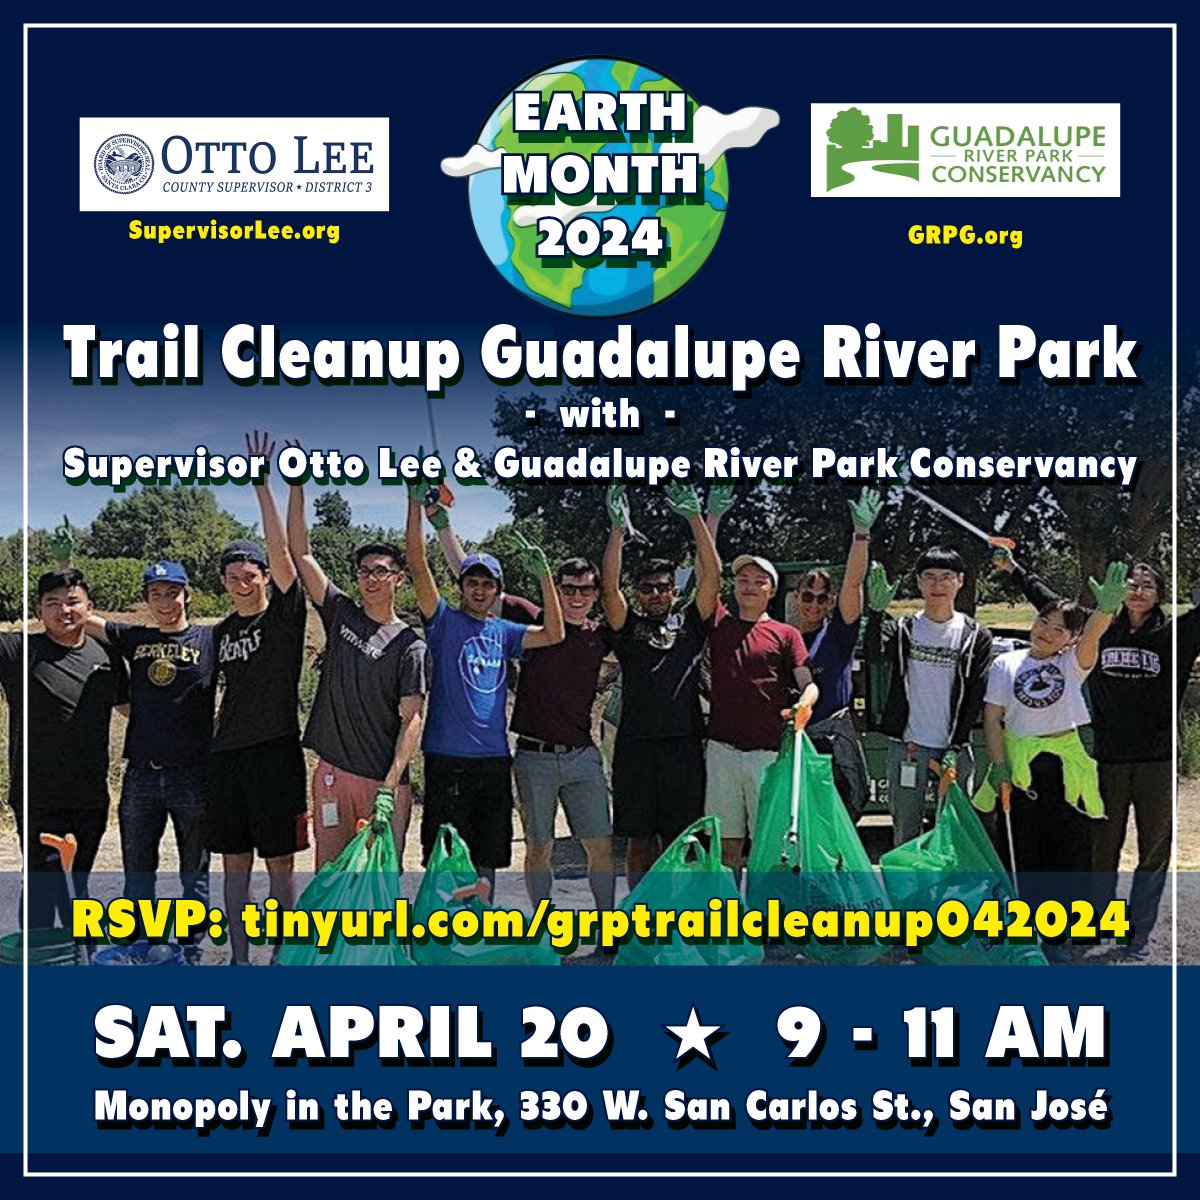 Thank you HGA San Jose for weeding along the trail for native species to be planted🌱 Give back to the planet this #EarthDay🌎 and register for a cleanup in the River Park next Saturday 4/20 cohosted with @SupOttoLee. Save your spot: eventbrite.com/e/trail-cleanu… #dtsj #lovetheGRP